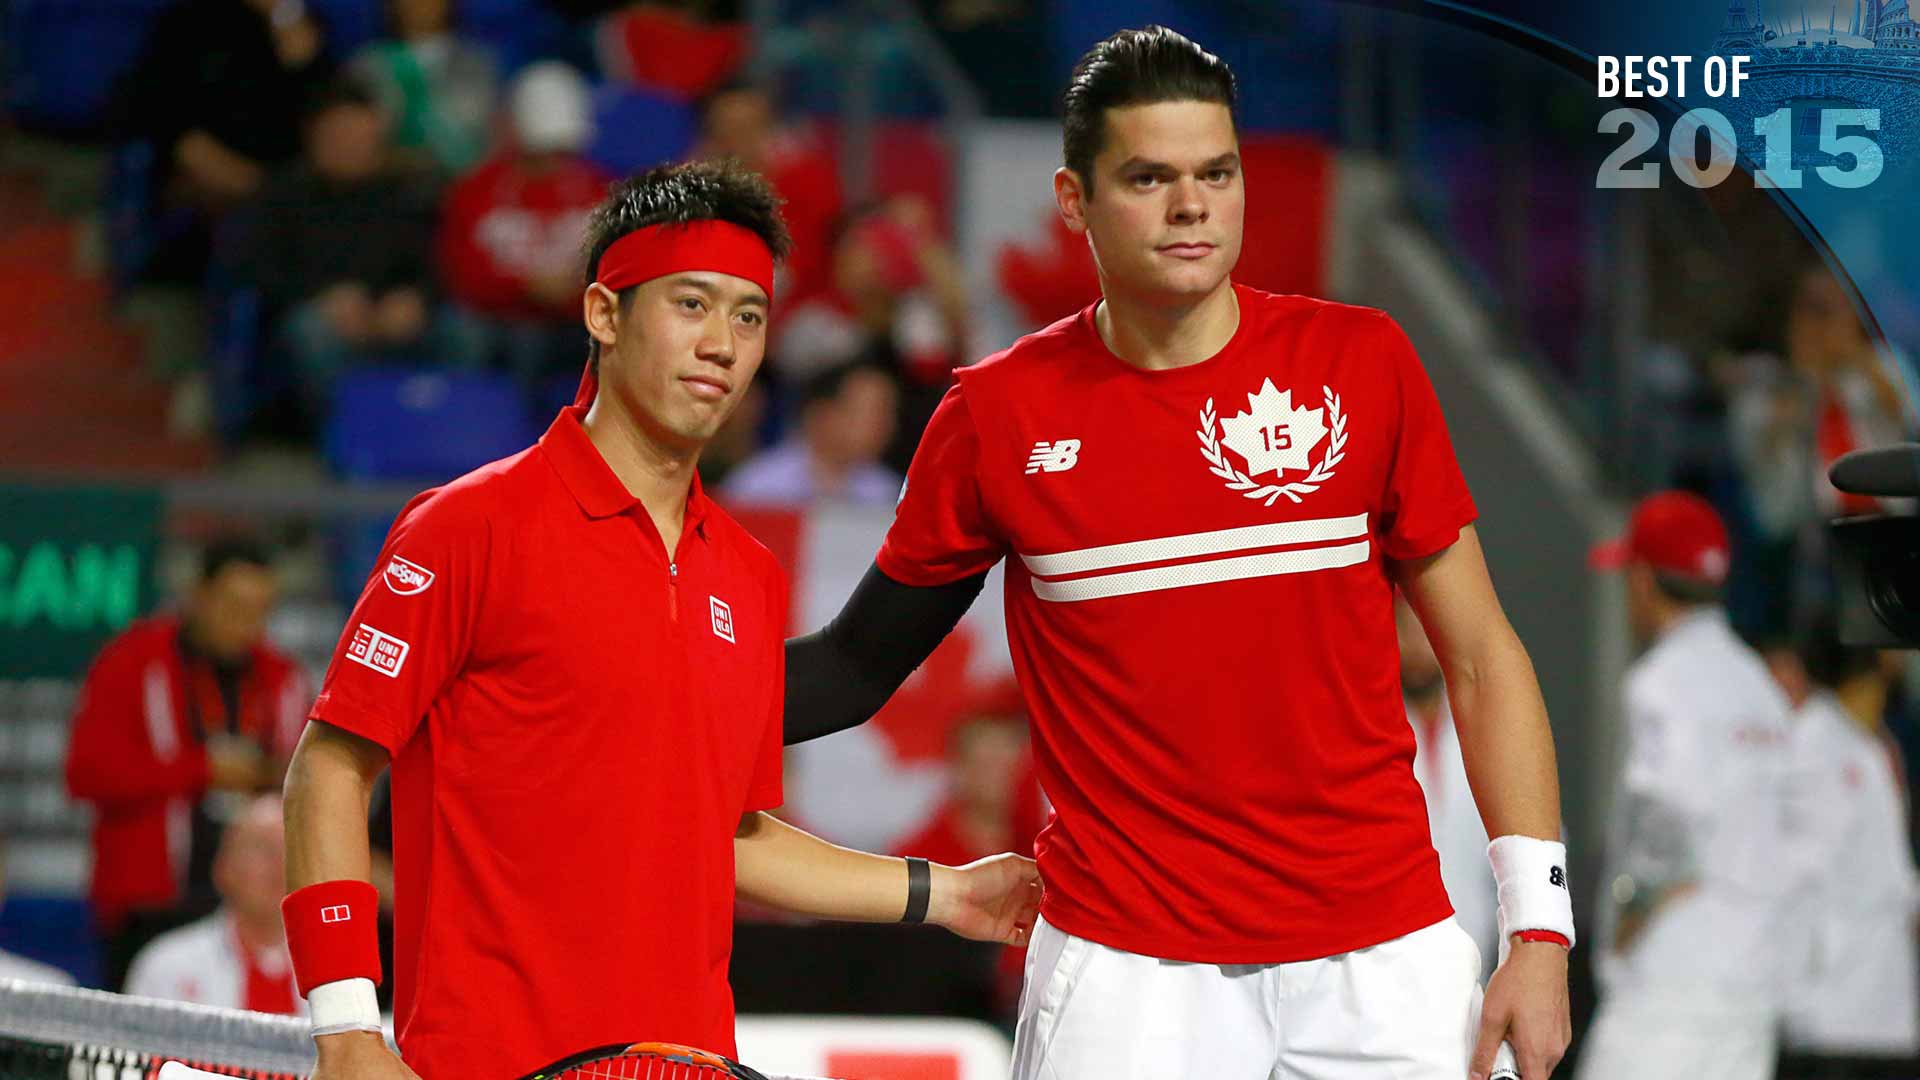 It was quality over quantity for Kei Nishikori and Milos Raonic in 2015.